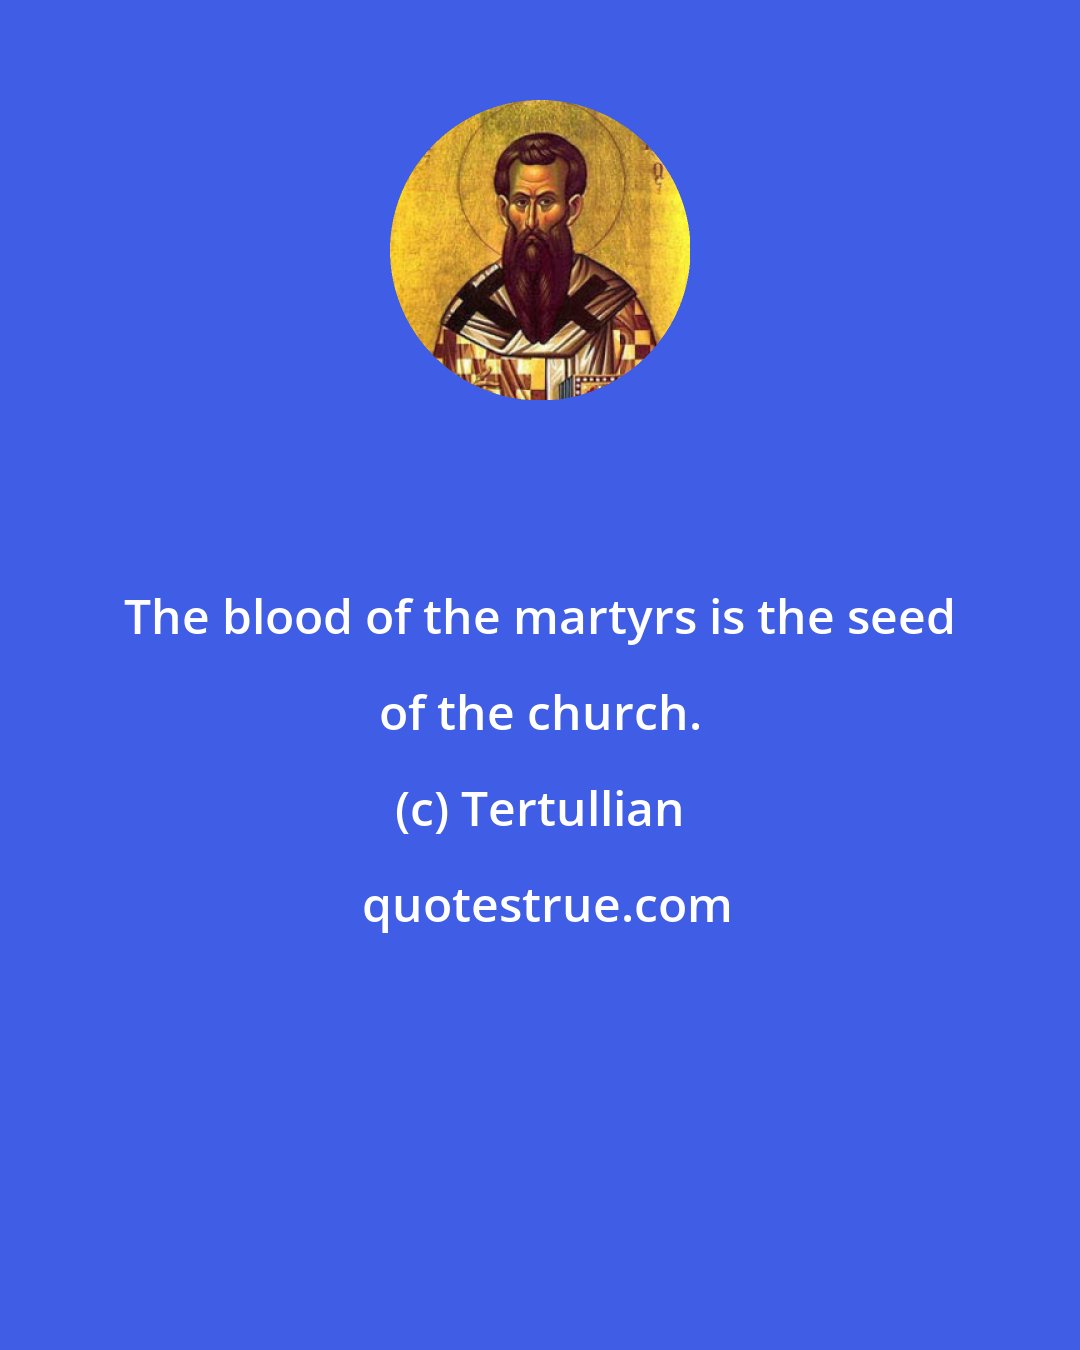 Tertullian: The blood of the martyrs is the seed of the church.